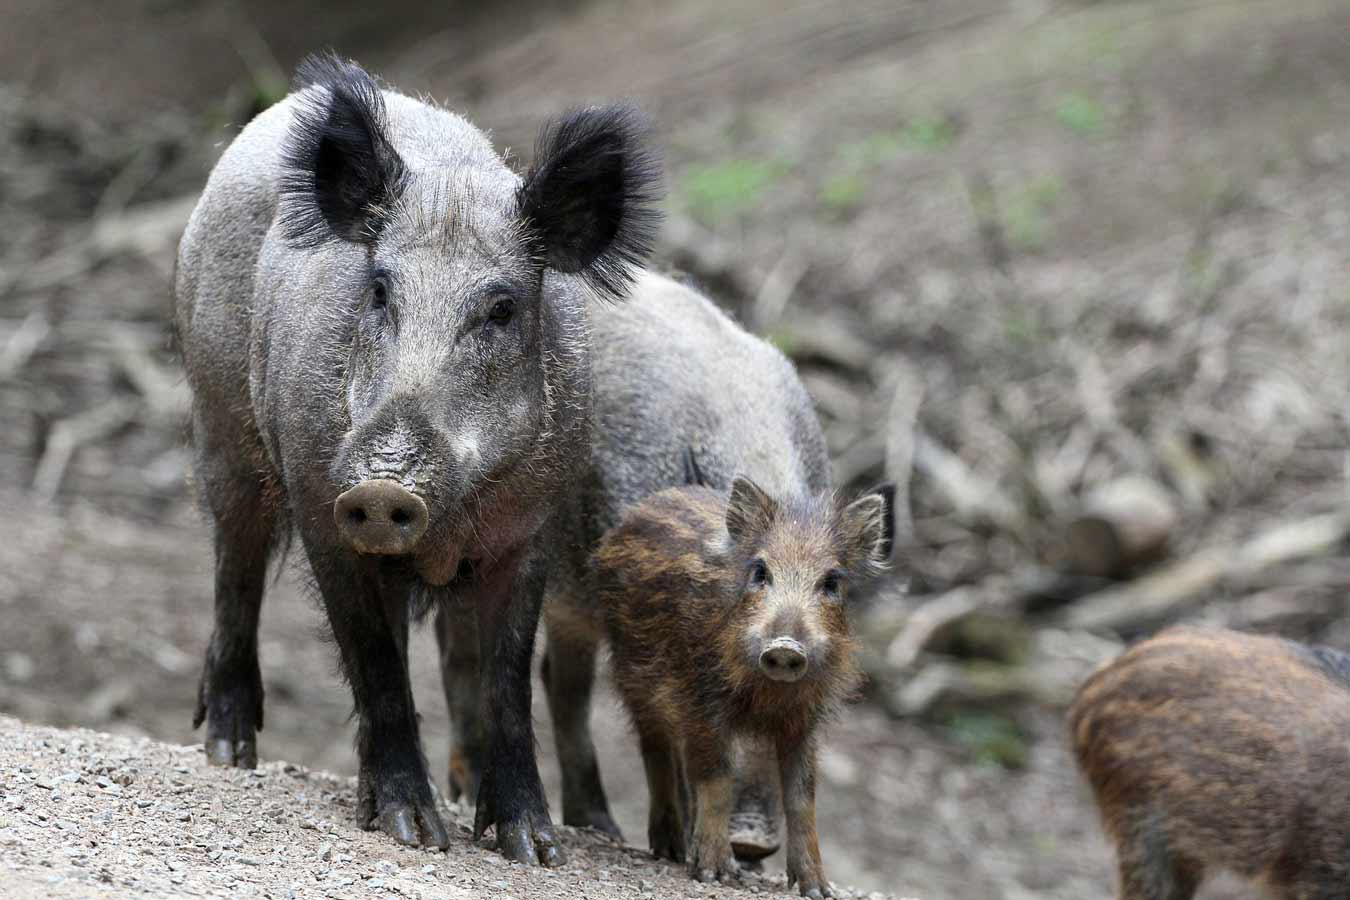 WHY?! Video Shows Men Pushing Boar Off Cliff, Killing the Animal | PETA